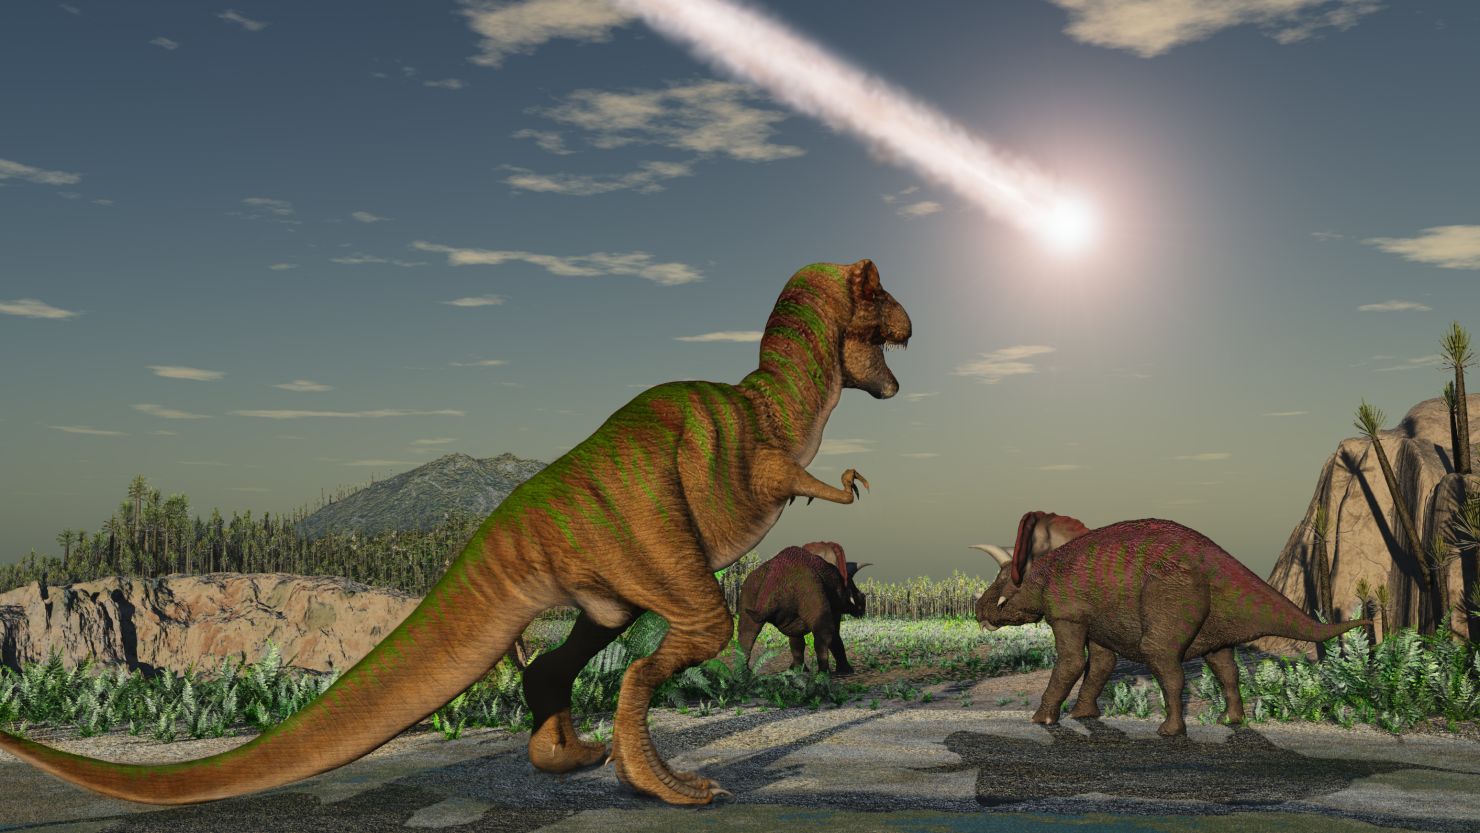 New analysis of fossil records suggest that large groups of dinosaurs left Europe hundreds of millions of years ago.